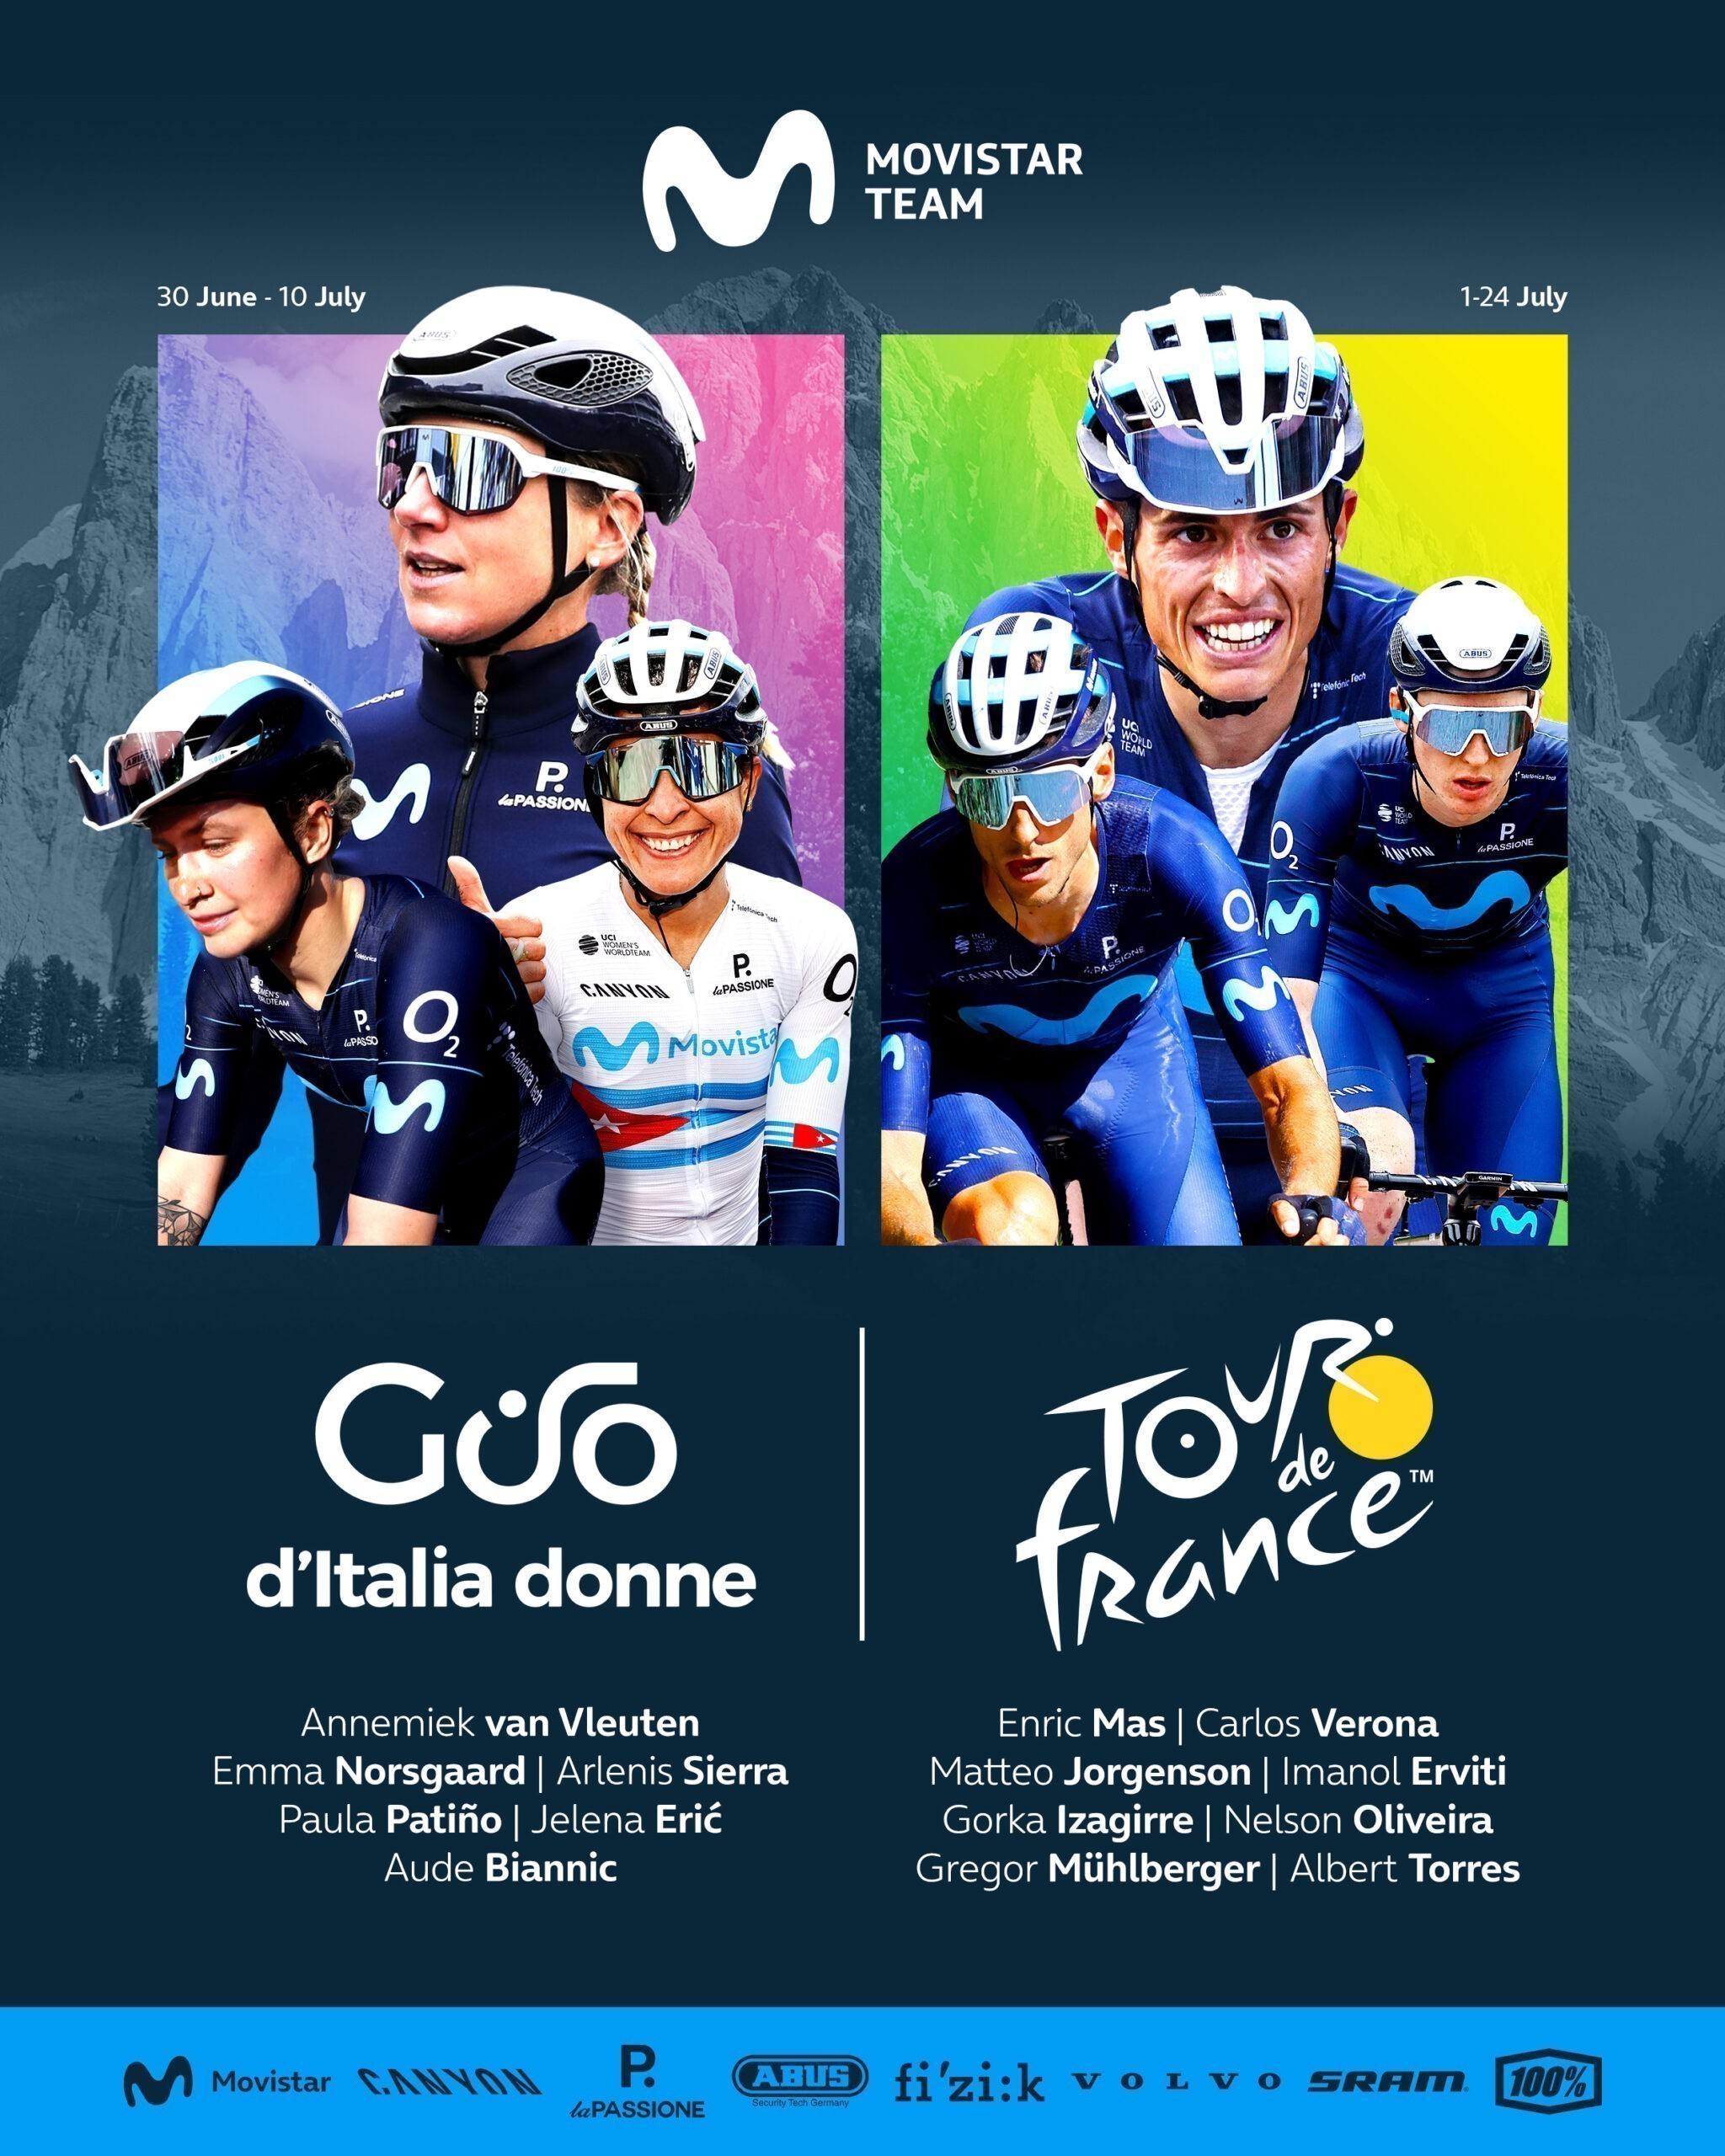 Giro Donne and Tour de France, a great double challenge for Movistar Team